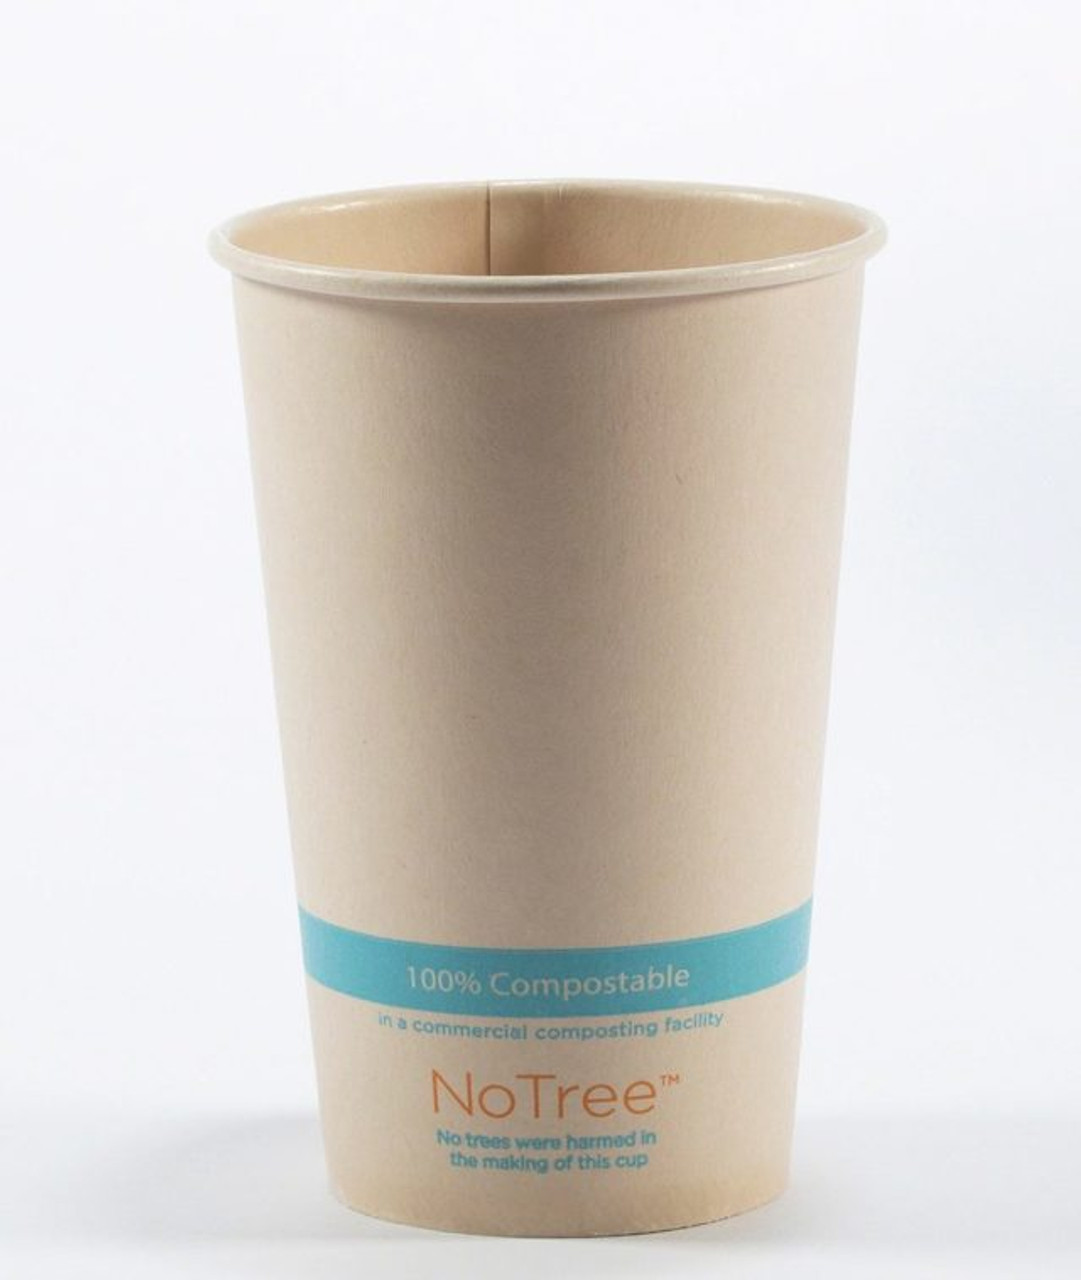 Print On Demand 16 oz Can Glass With Bamboo Lid and Straw CLEAR